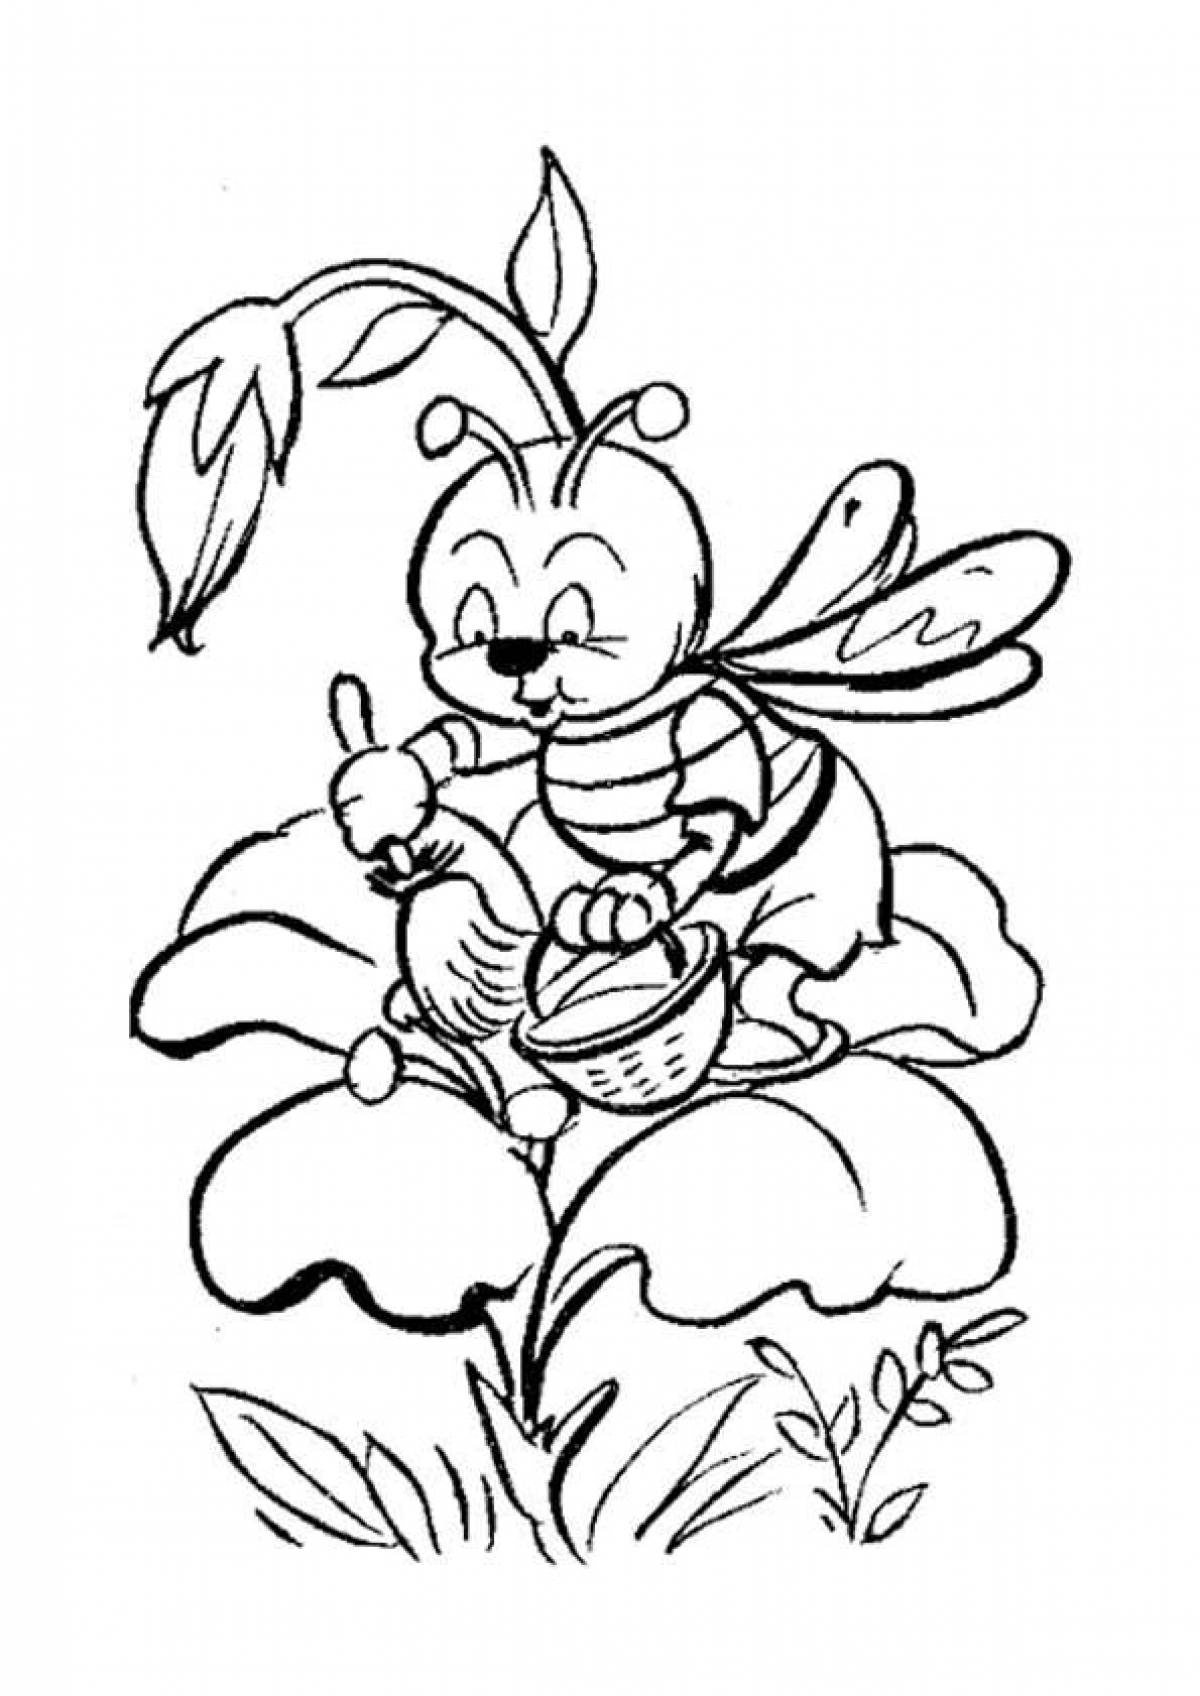 Charming bee coloring page